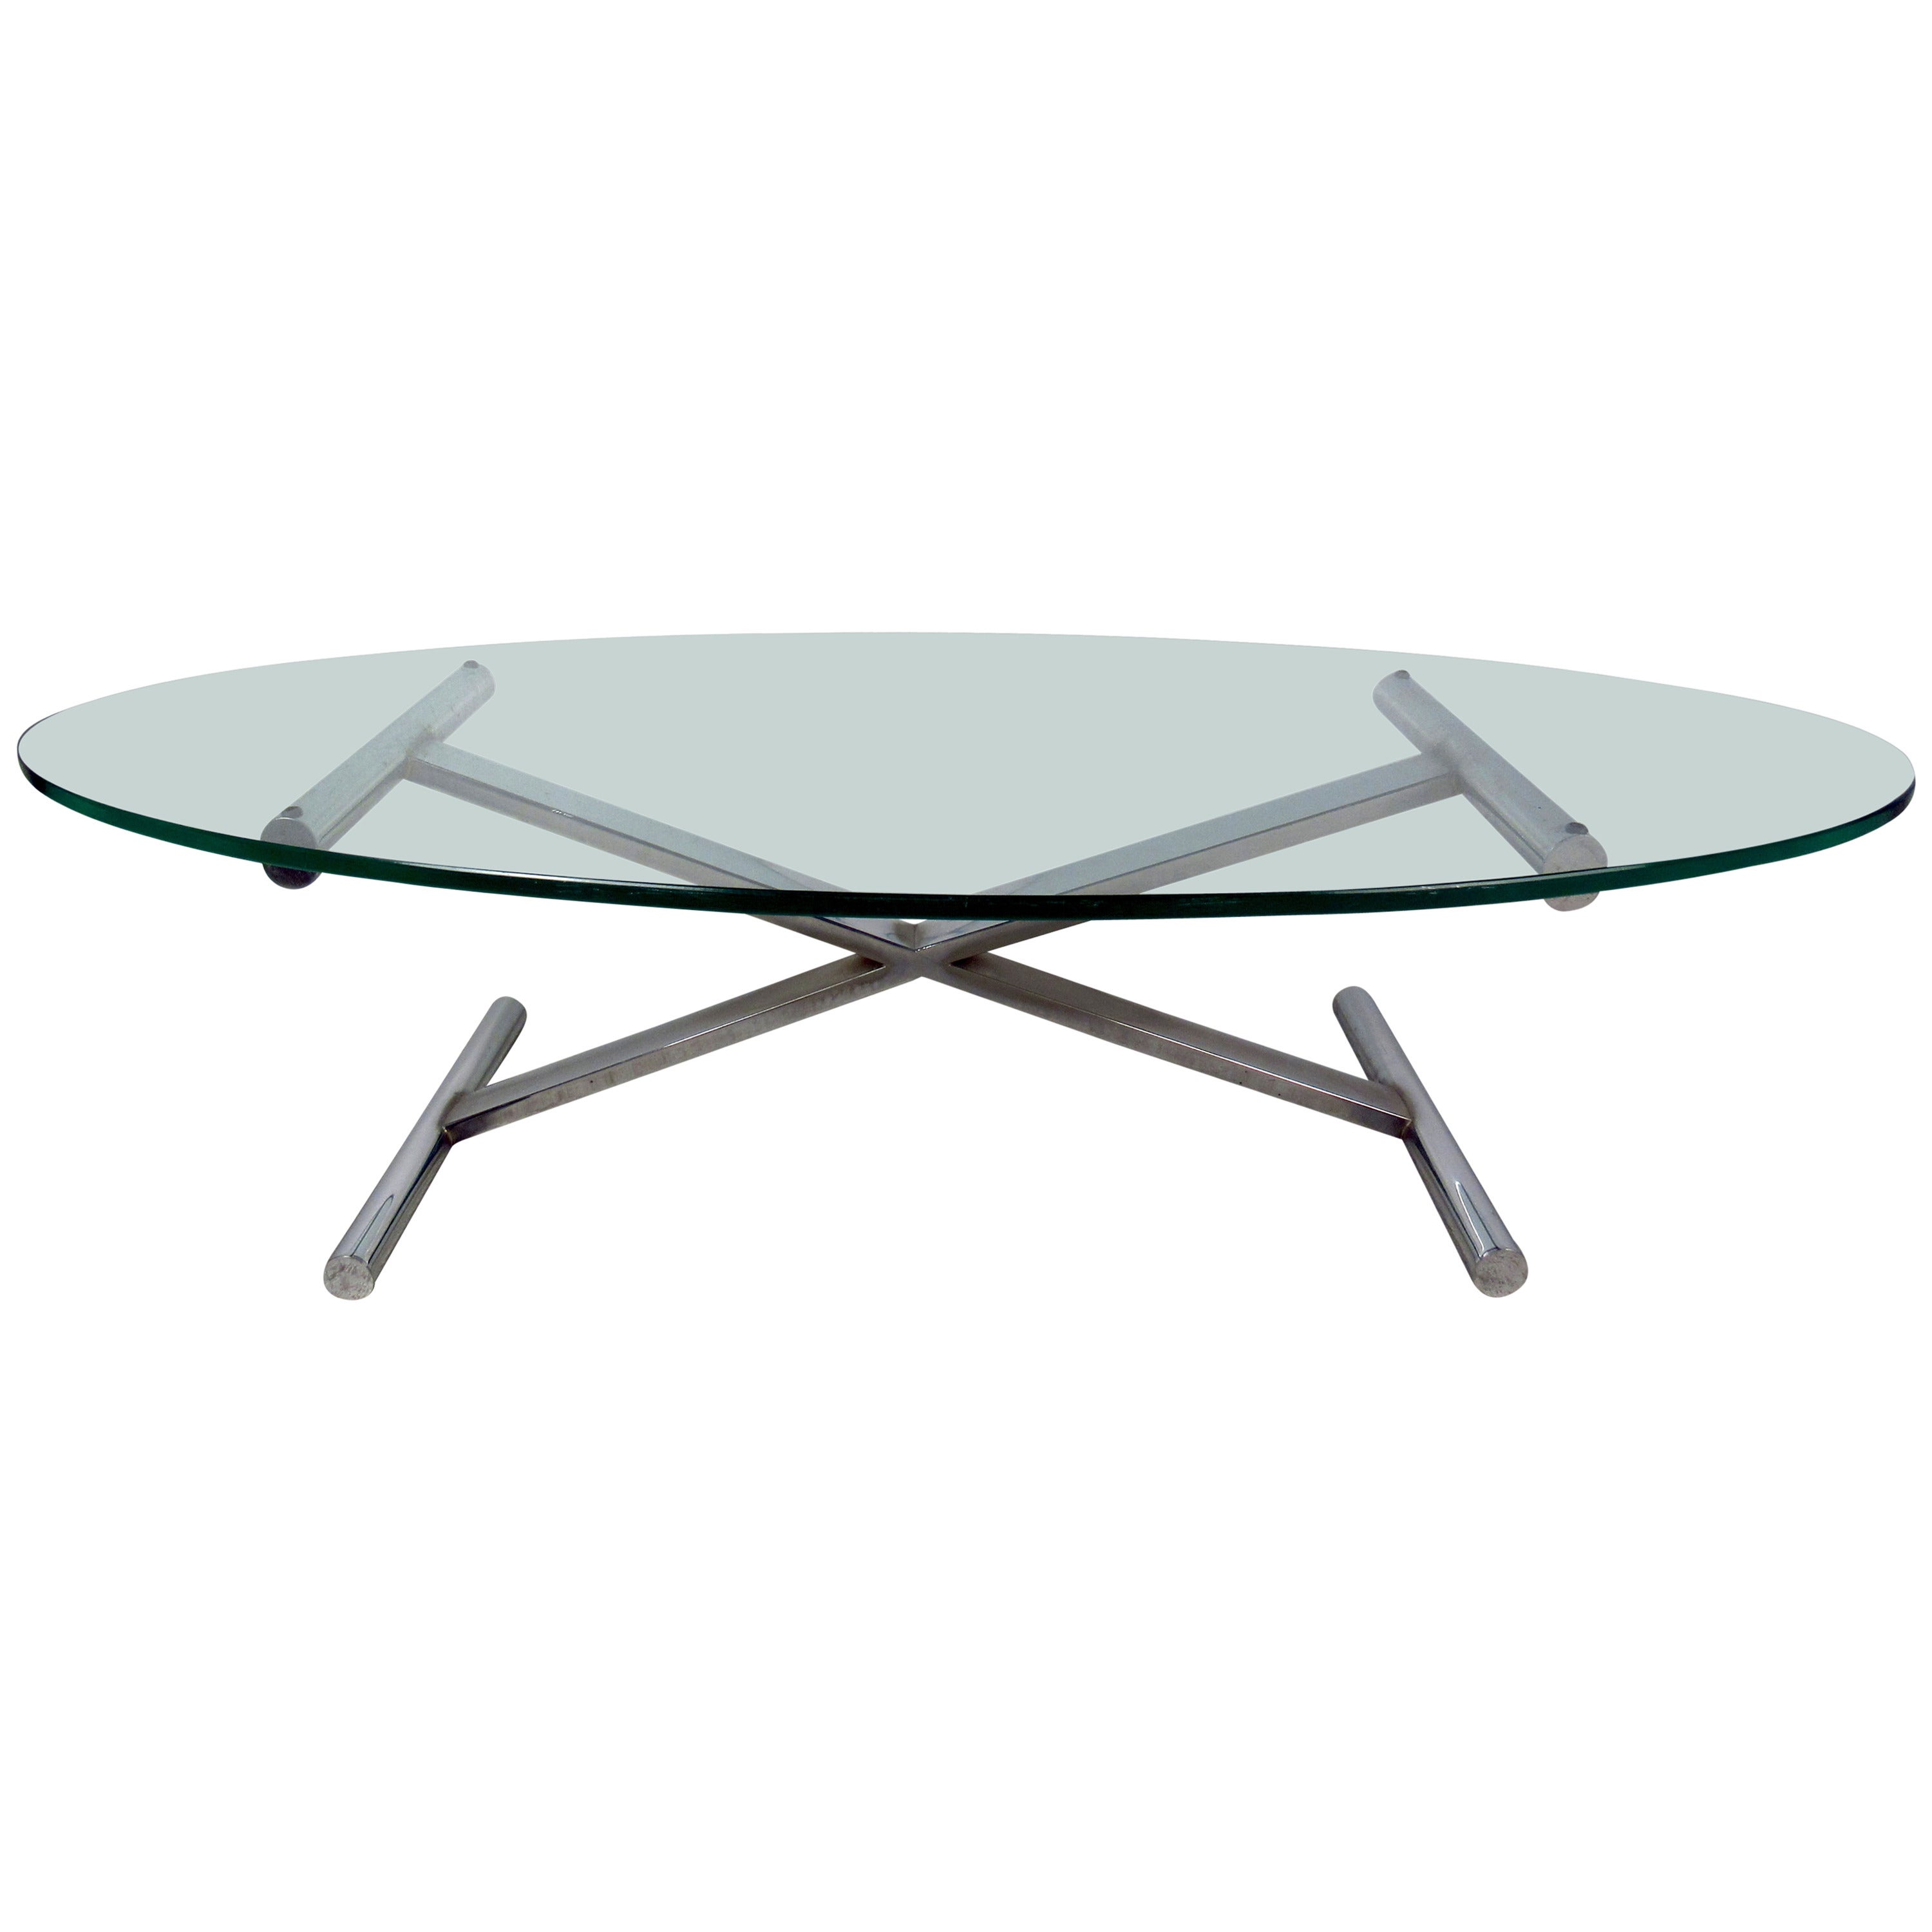 Oval Shaped Glass Top Coffee Table with Chrome Base